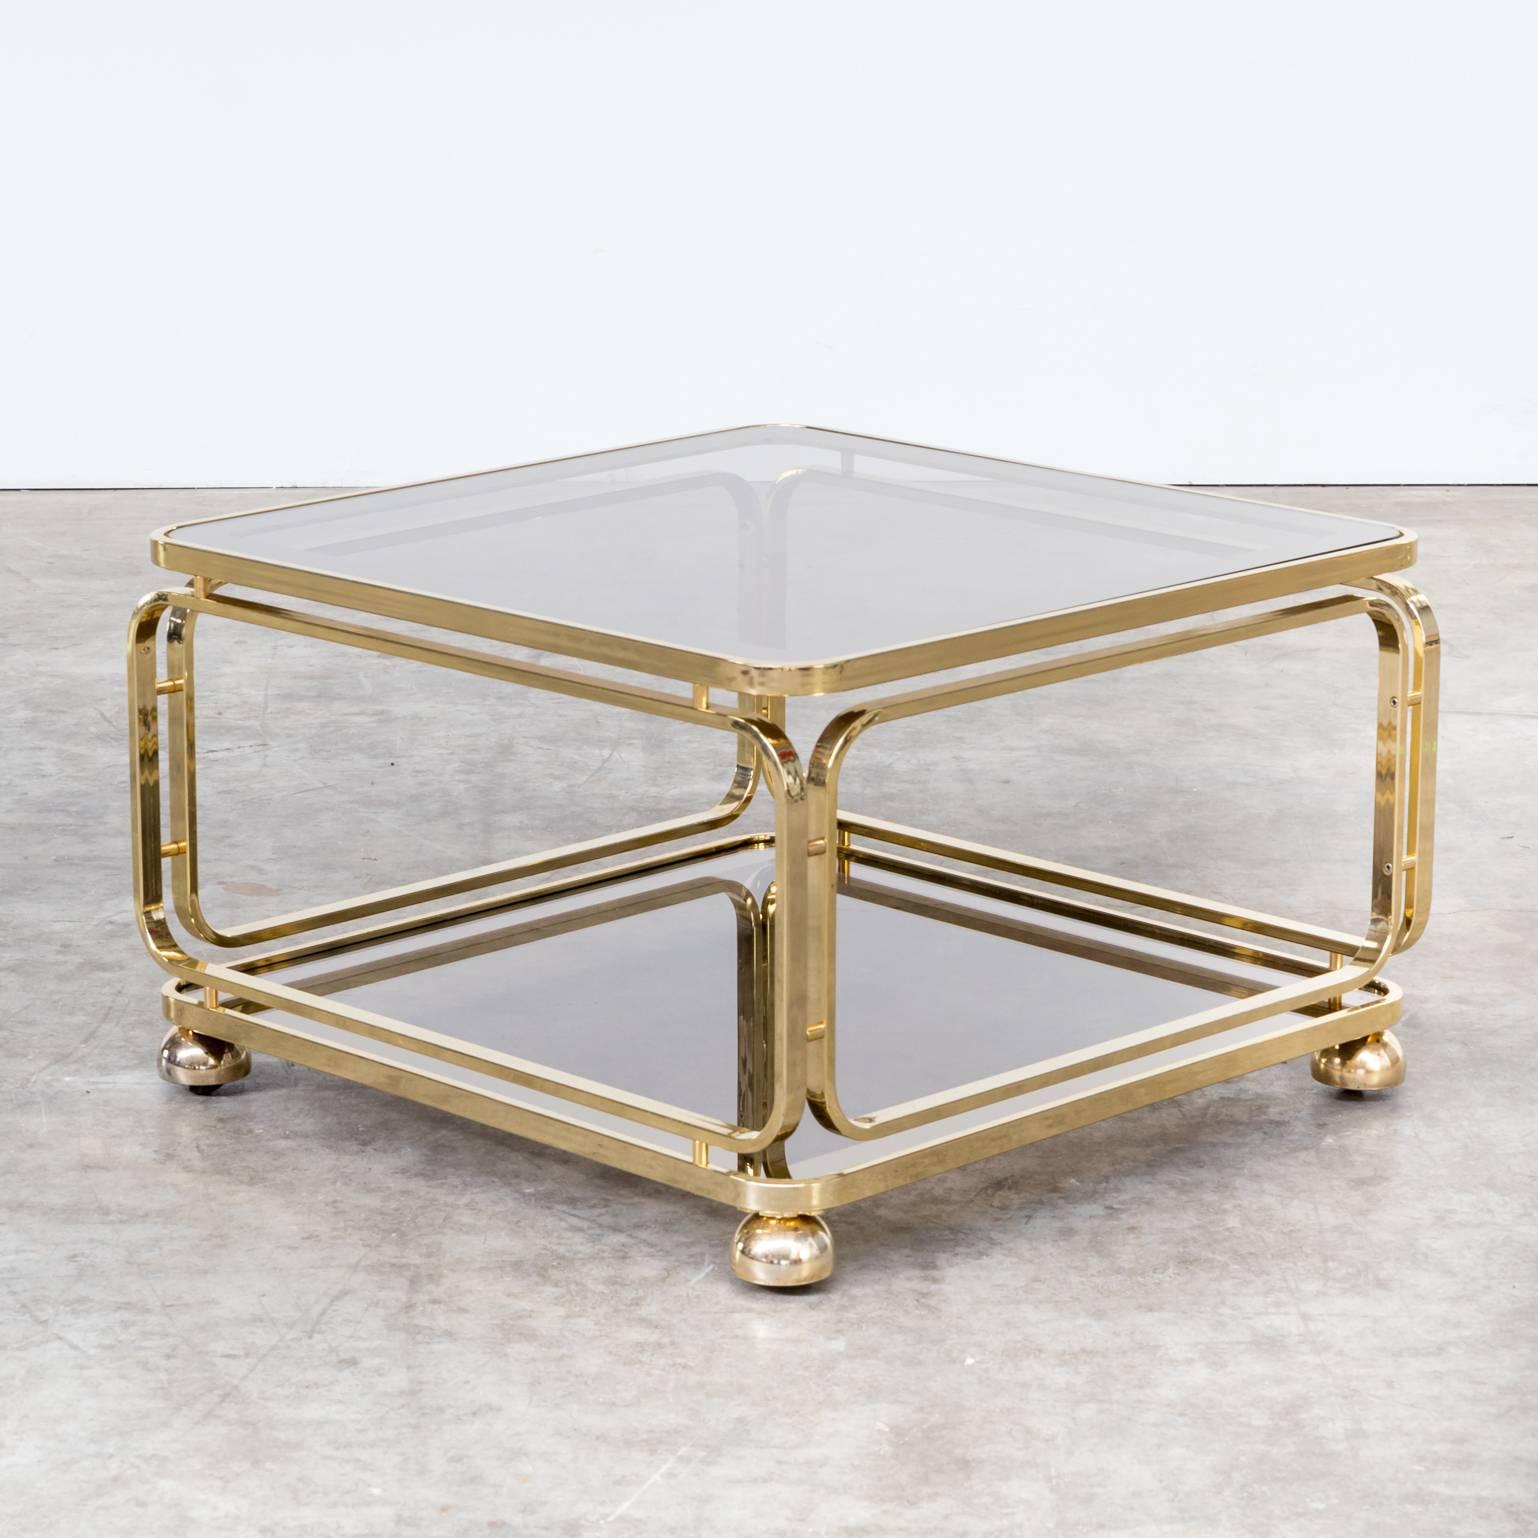 1960s brass and glass coffee table, side table for Allegri. Darkend glass, polished brass framing. Table is in good condition, wear consistant with age and use. Nice patina on the glass. Original signed Allegri.